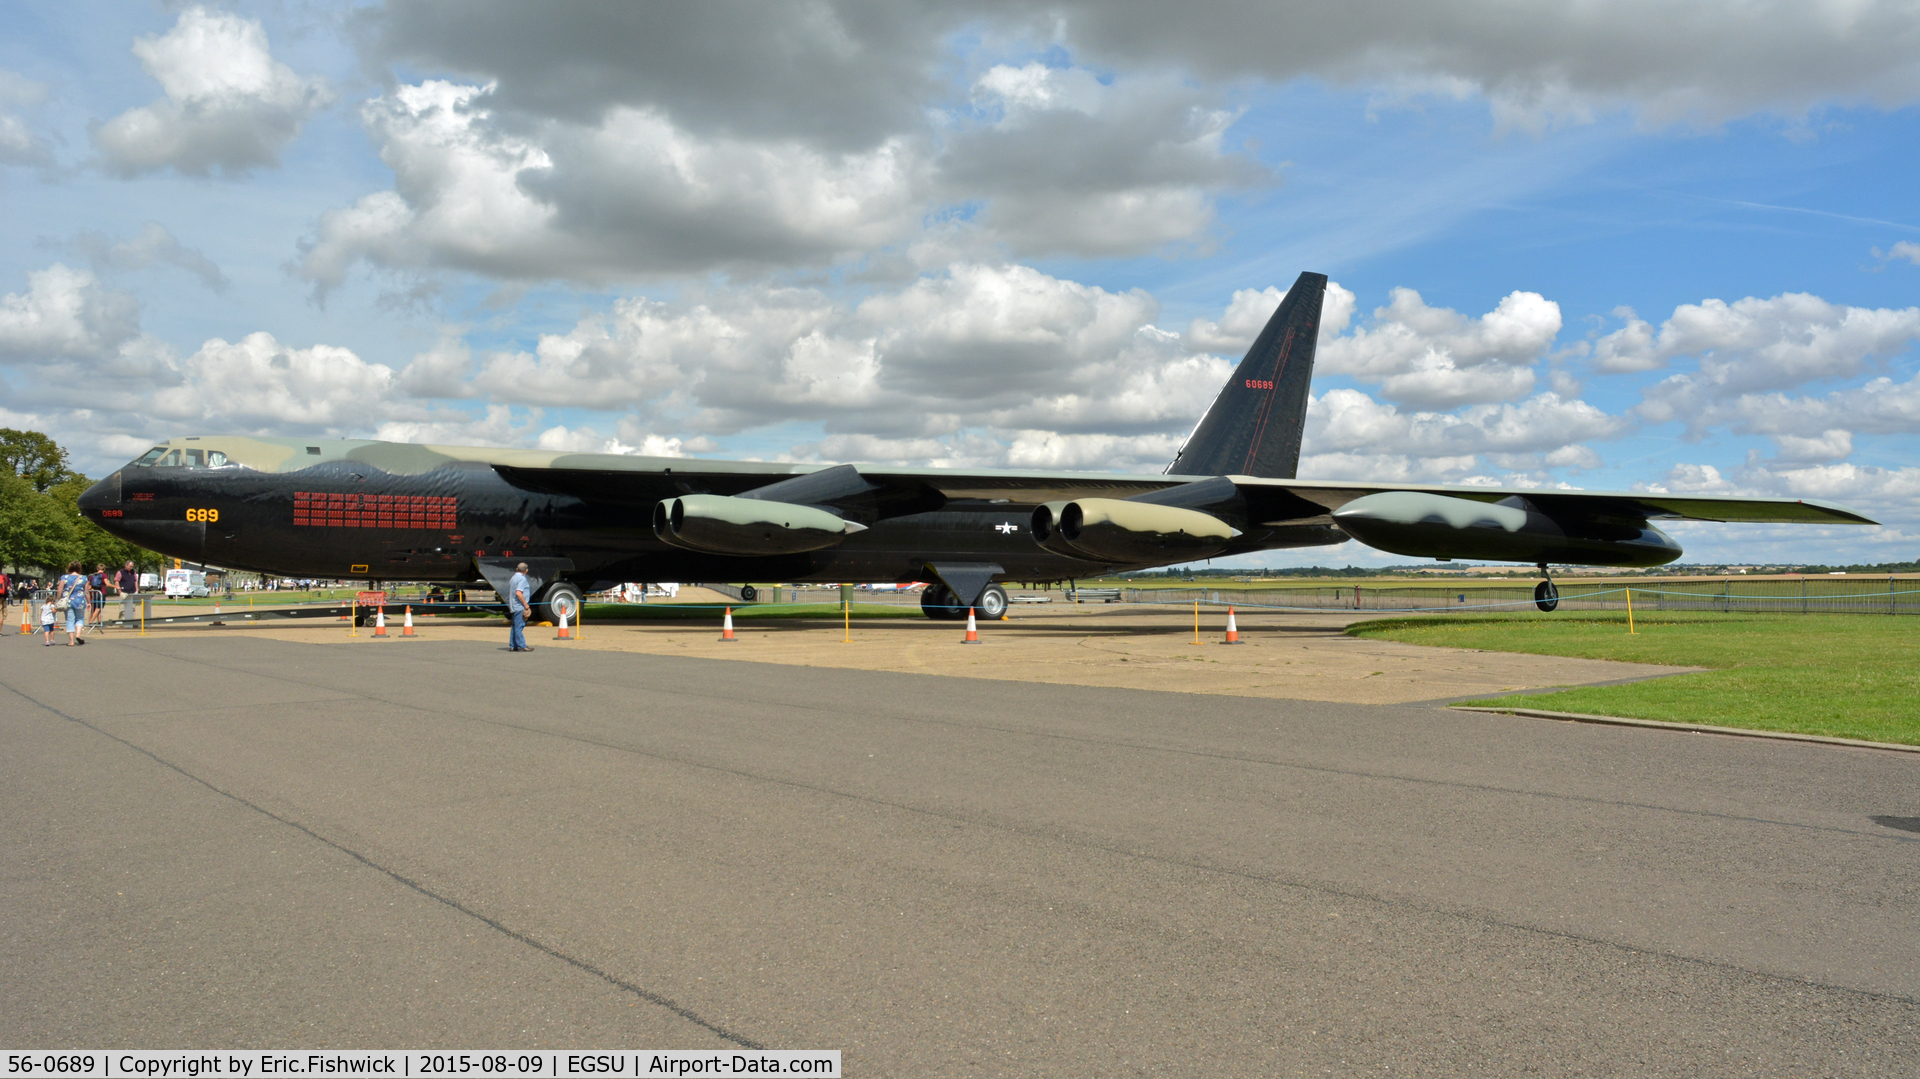 56-0689, 1956 Boeing B-52D Stratofortress C/N 464060, 1. 56-0689 due to return to the American Air Museum, Duxford, Cambridgeshire.